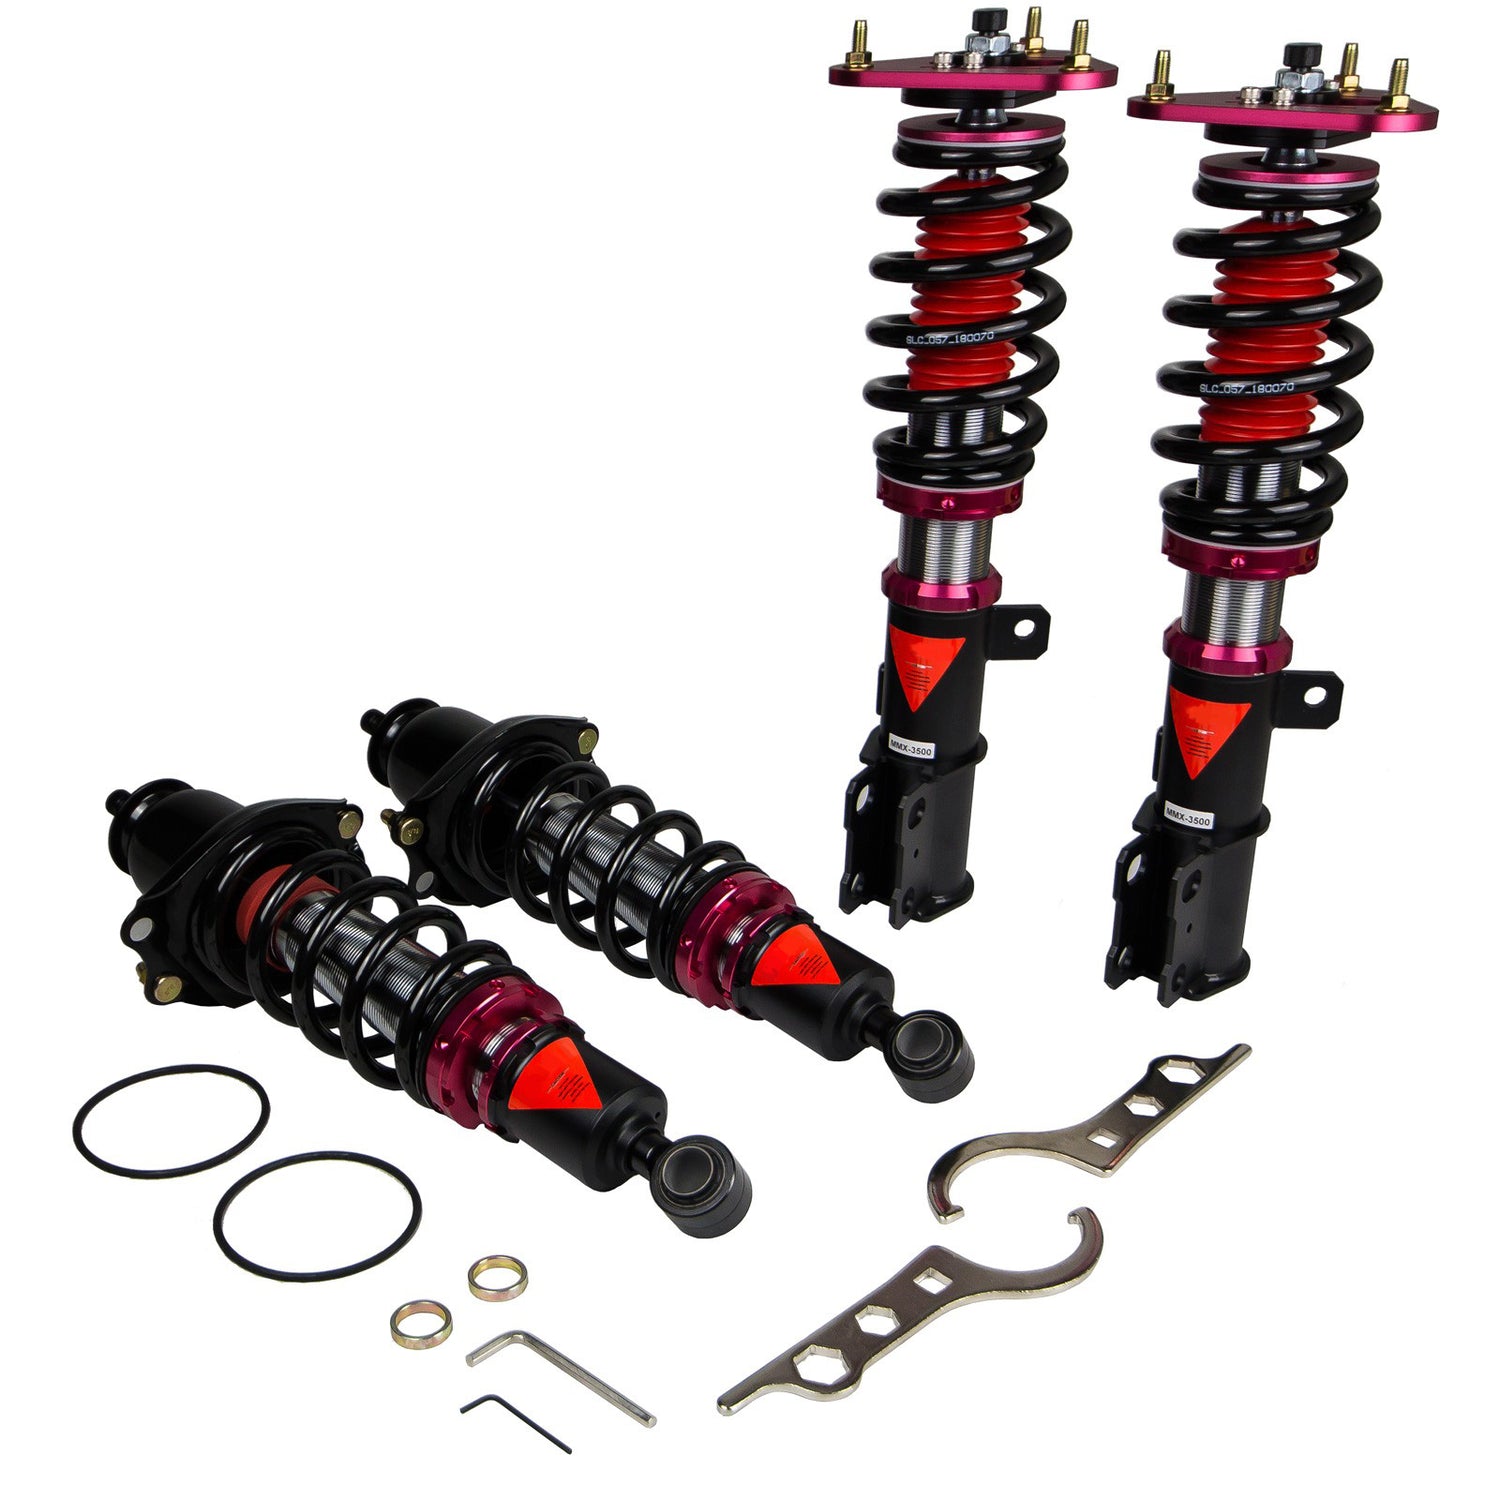 MMX3480-B MAXX Coilovers Lowering Kit, Fully Adjustable, Ride Height, 40 Clicks Rebound Settings, Toyota Matrix(E120/E130) 03-08